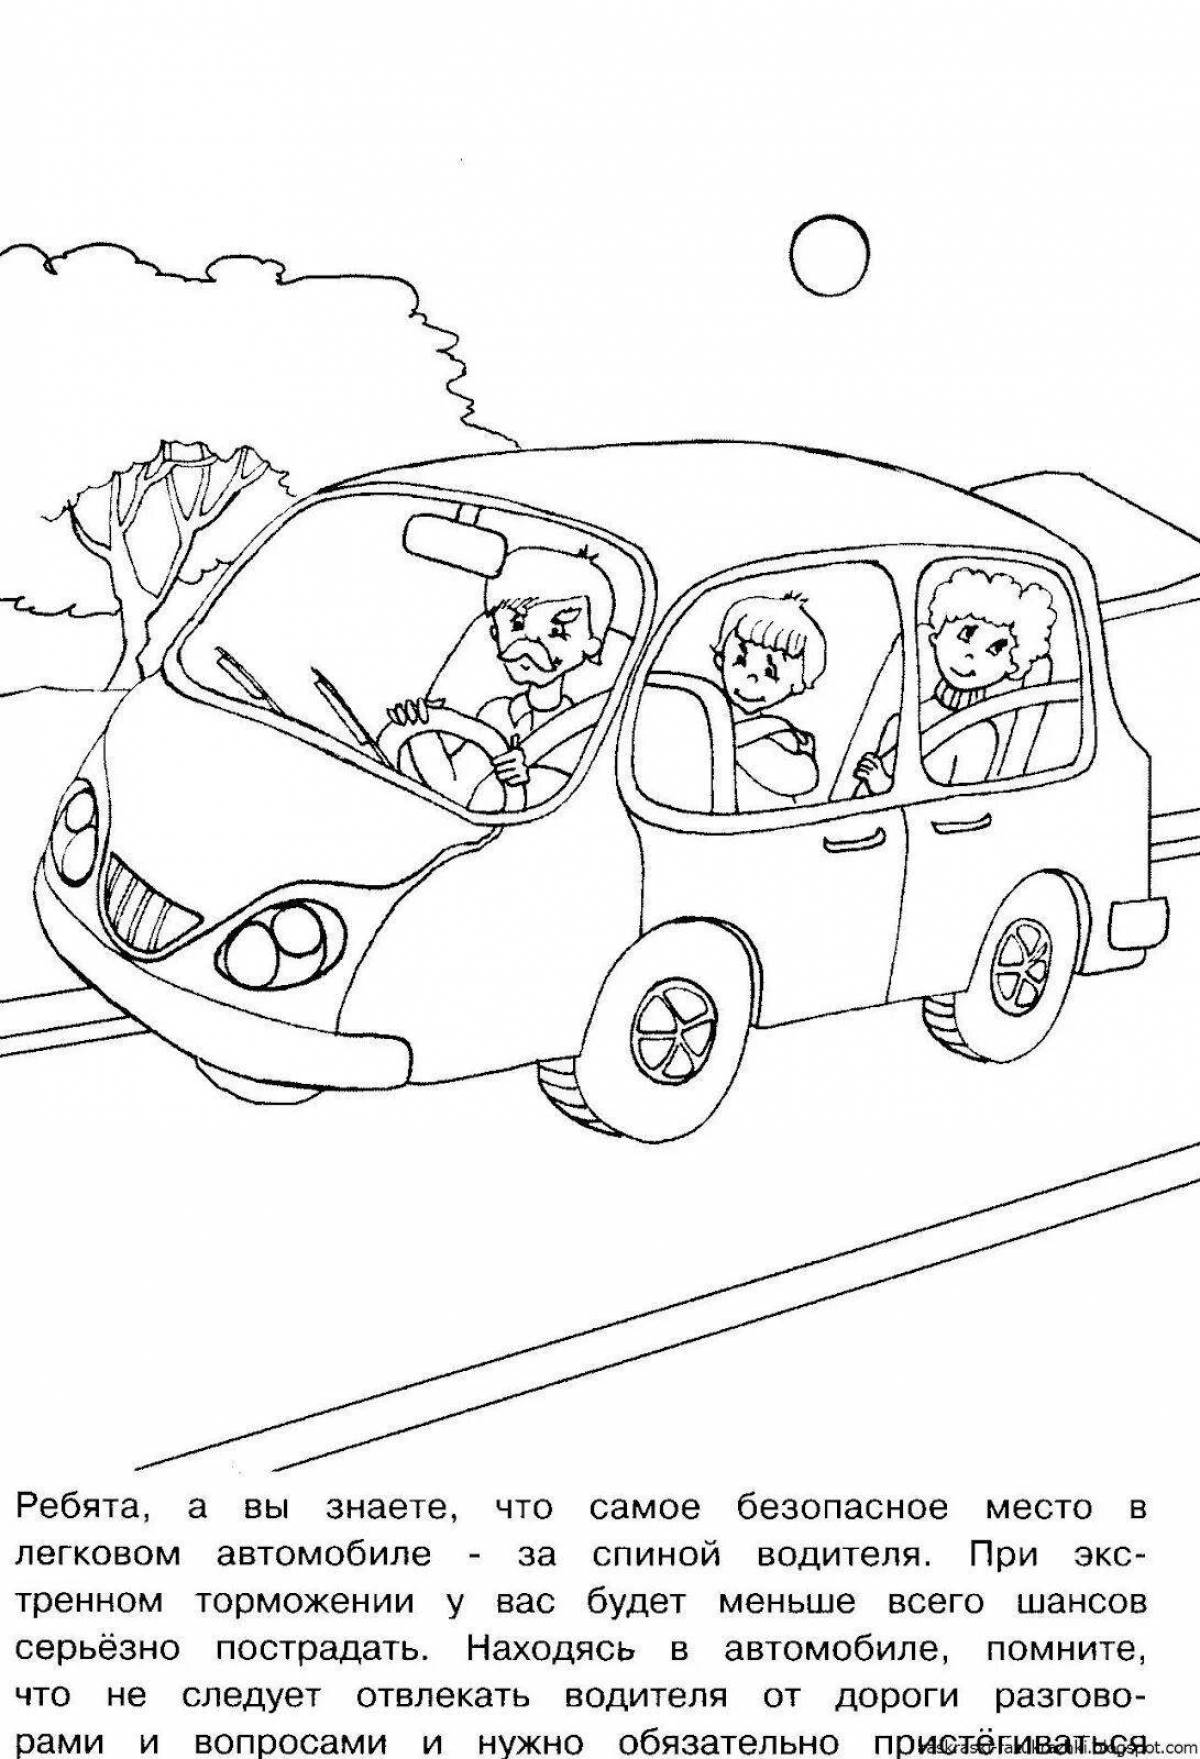 For children according to traffic rules for elementary school #8